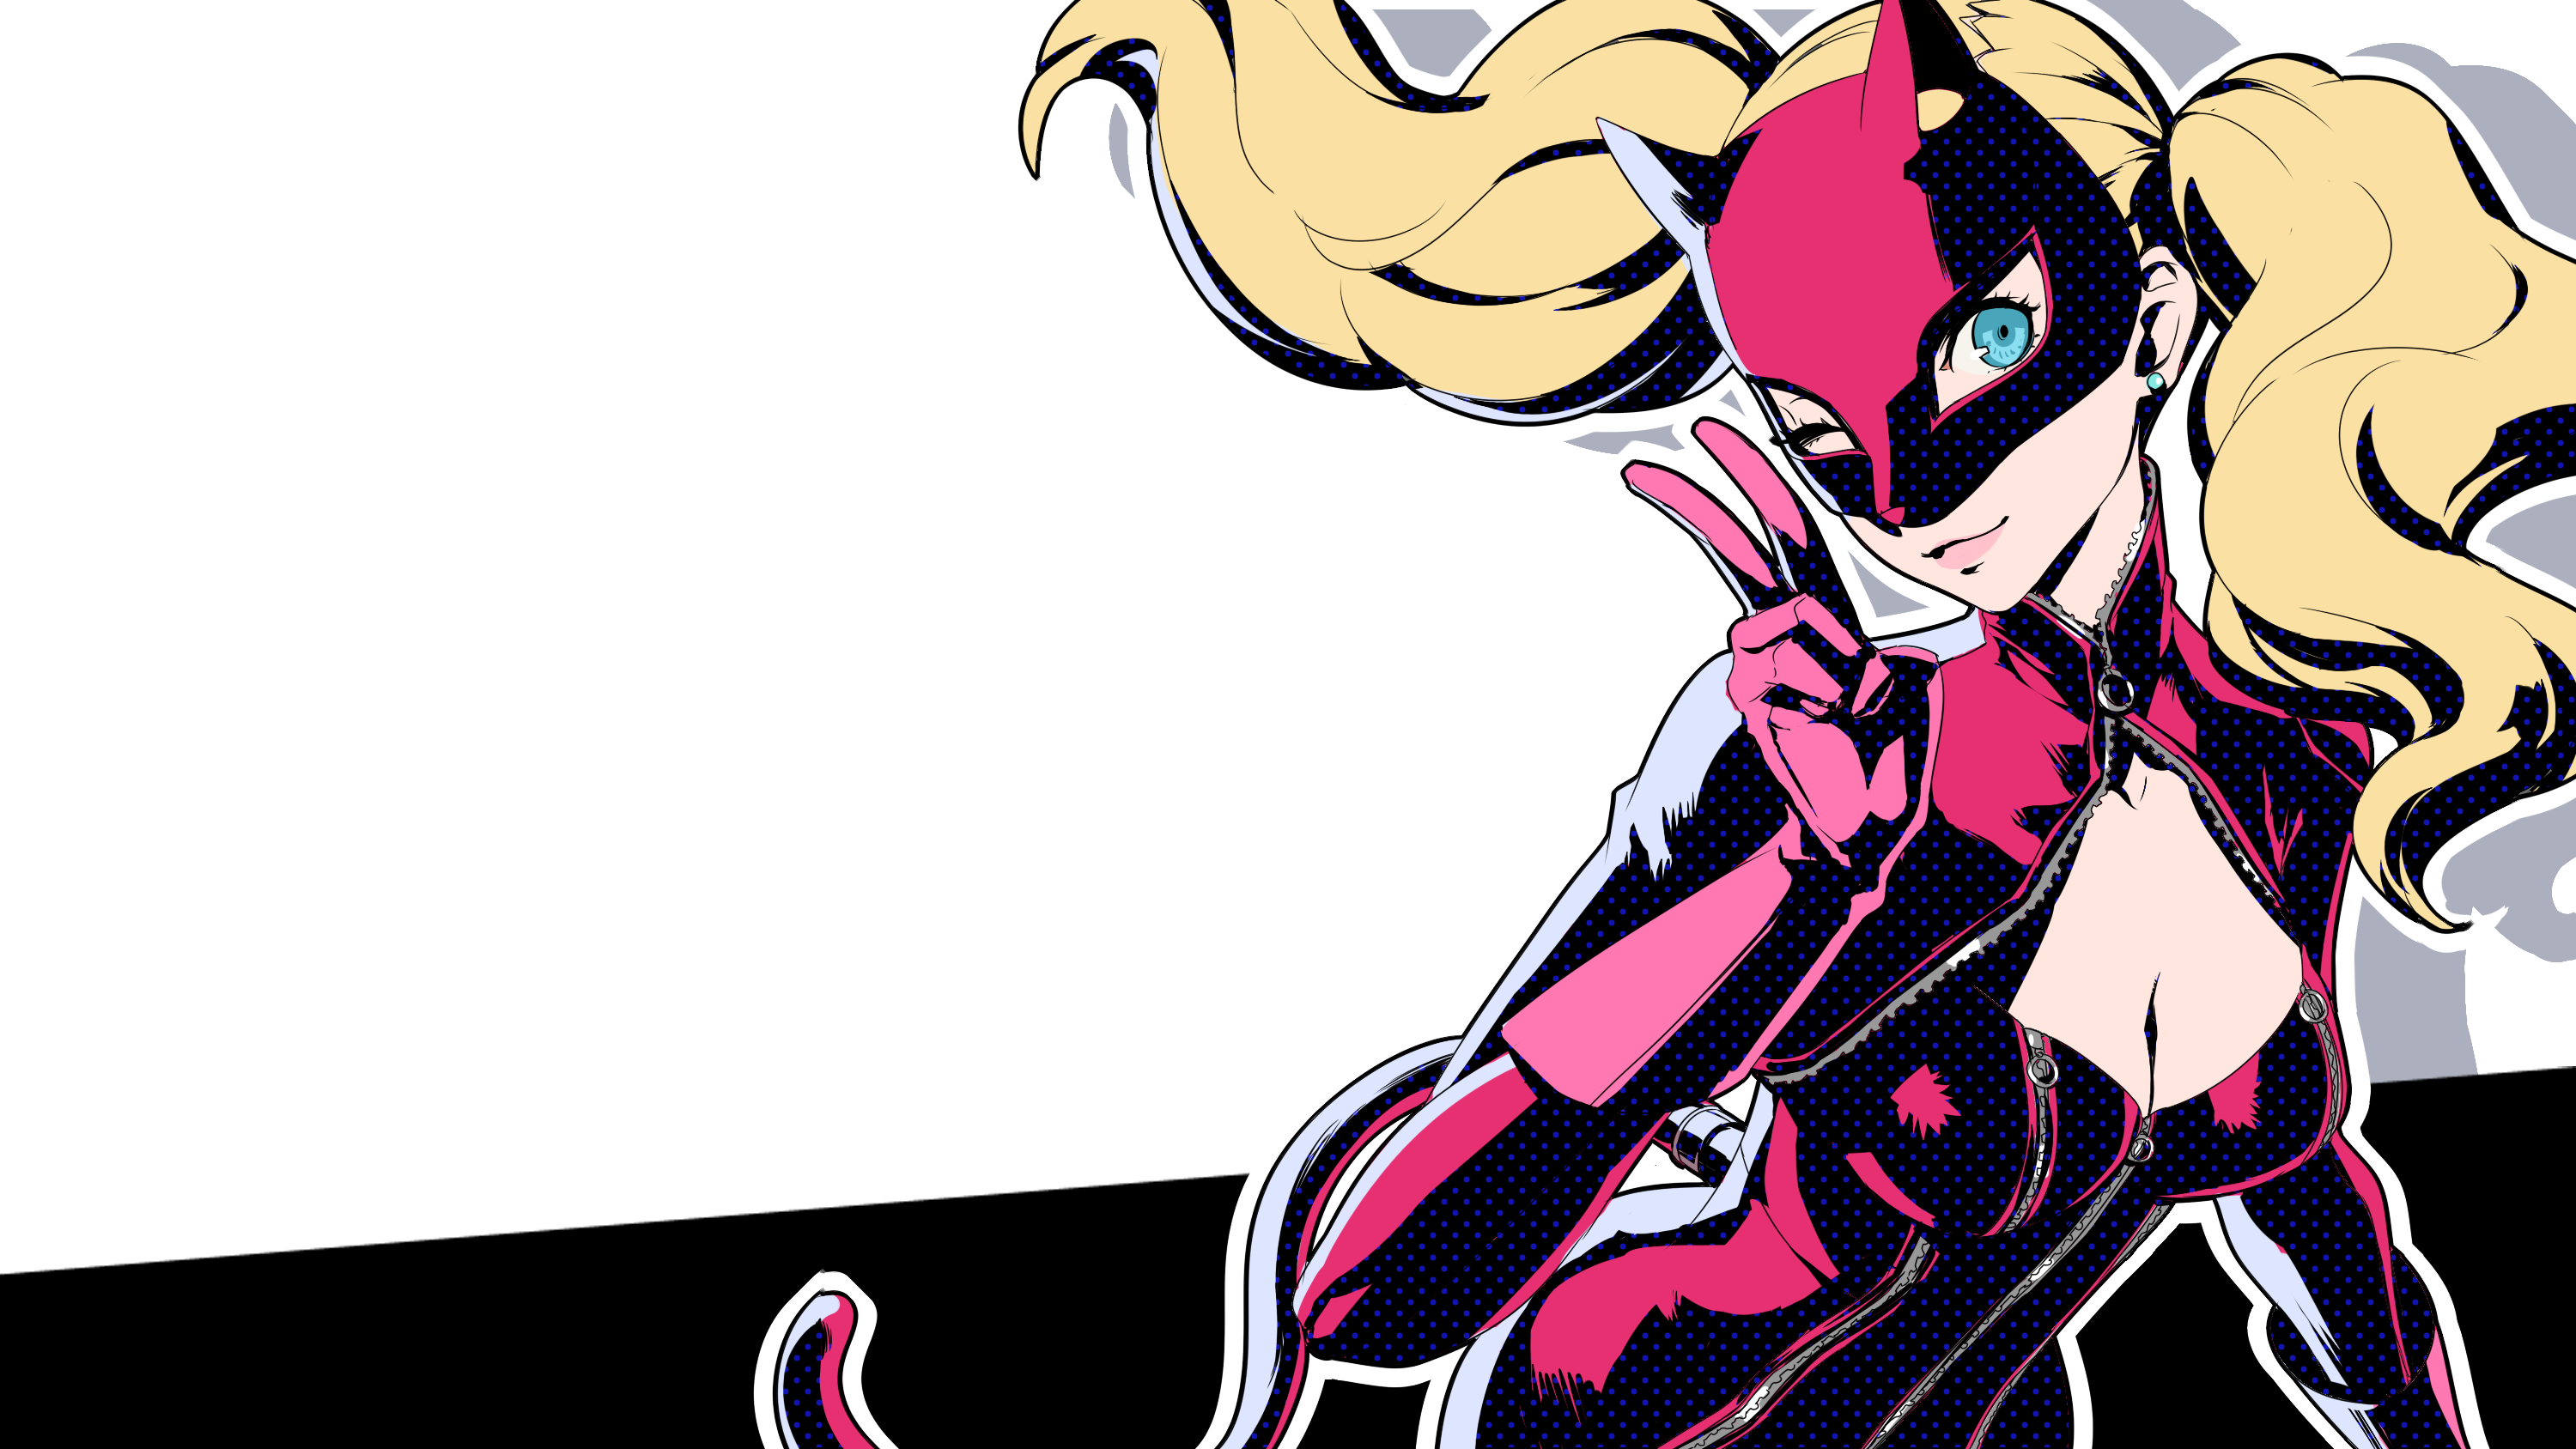 Ann From Persona 5 Wallpaper, HD Games 4K Wallpaper, Image